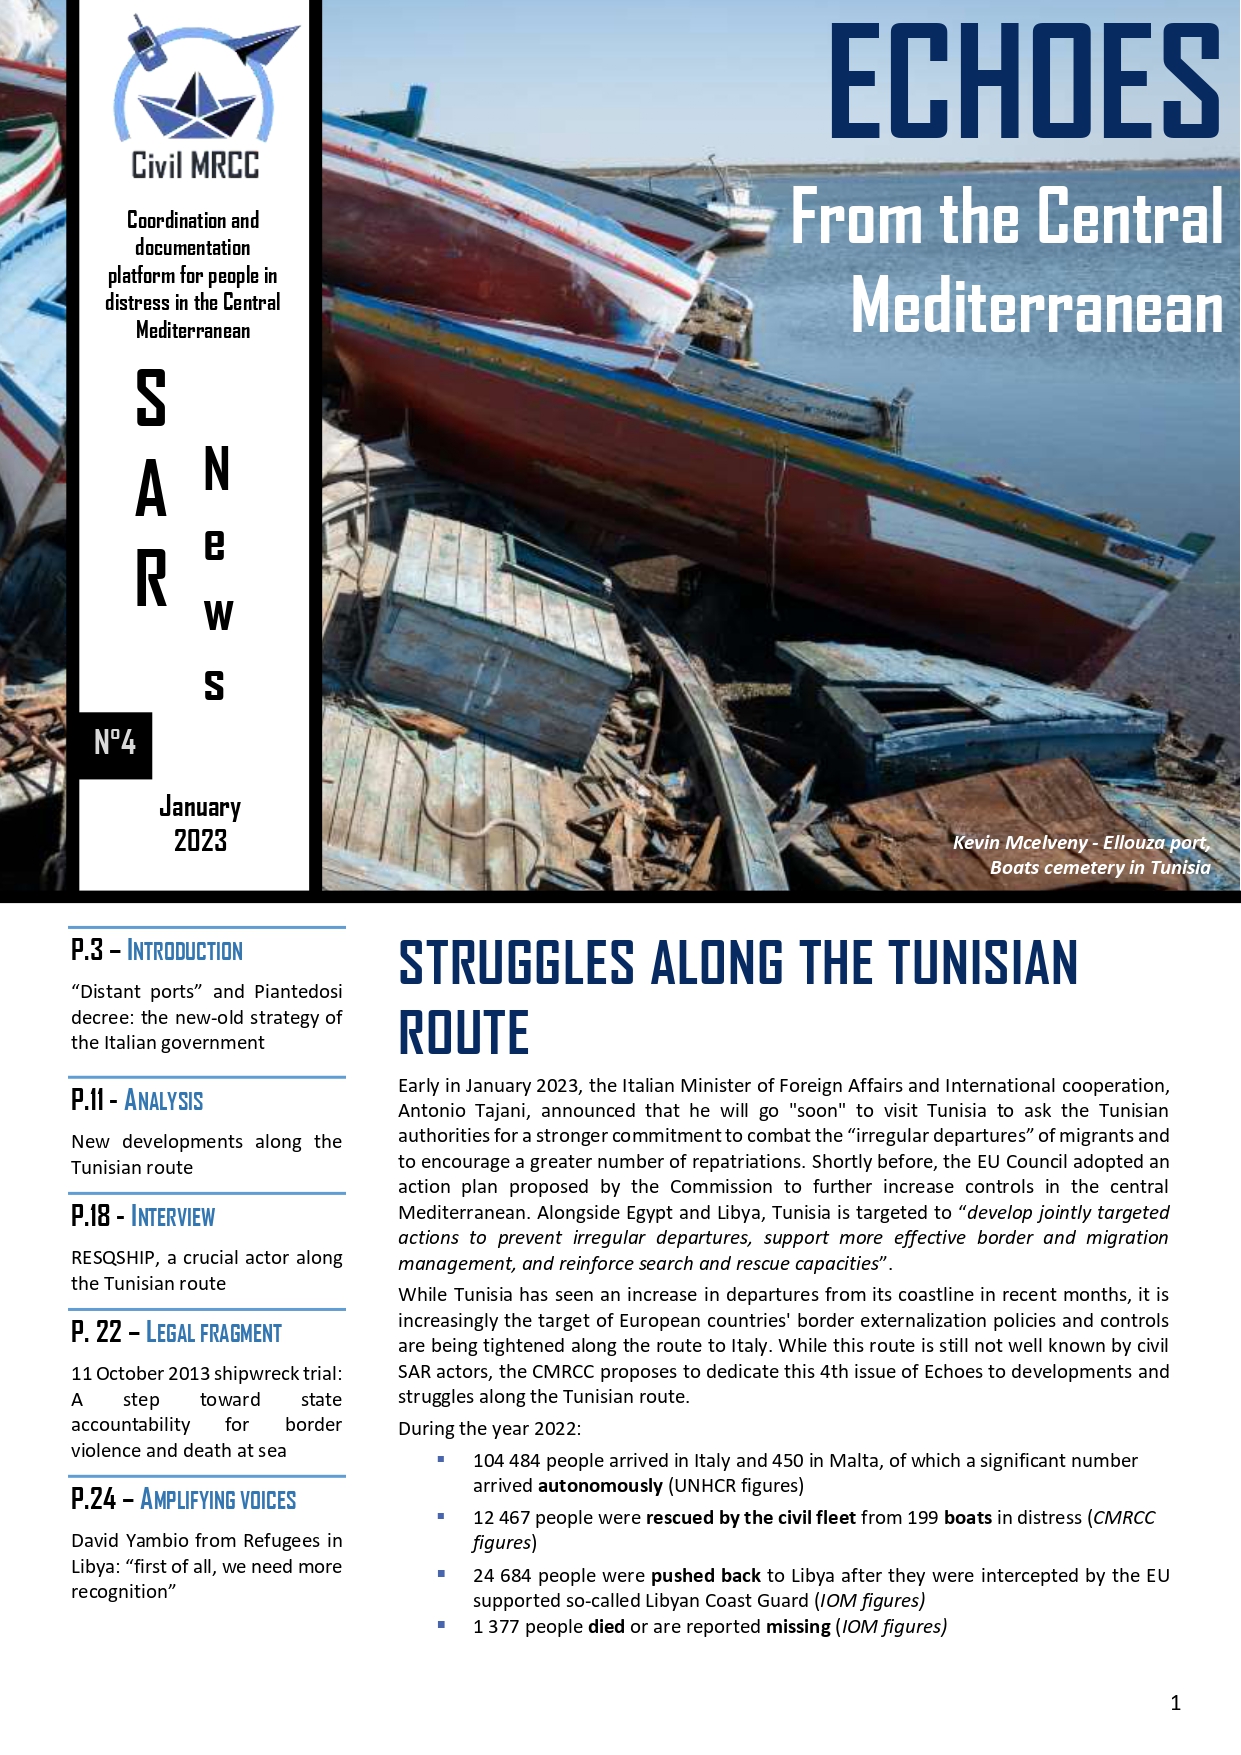 4-cmrcc-echoes-struggles-along-the-tunisian-route_page-0001-5025560